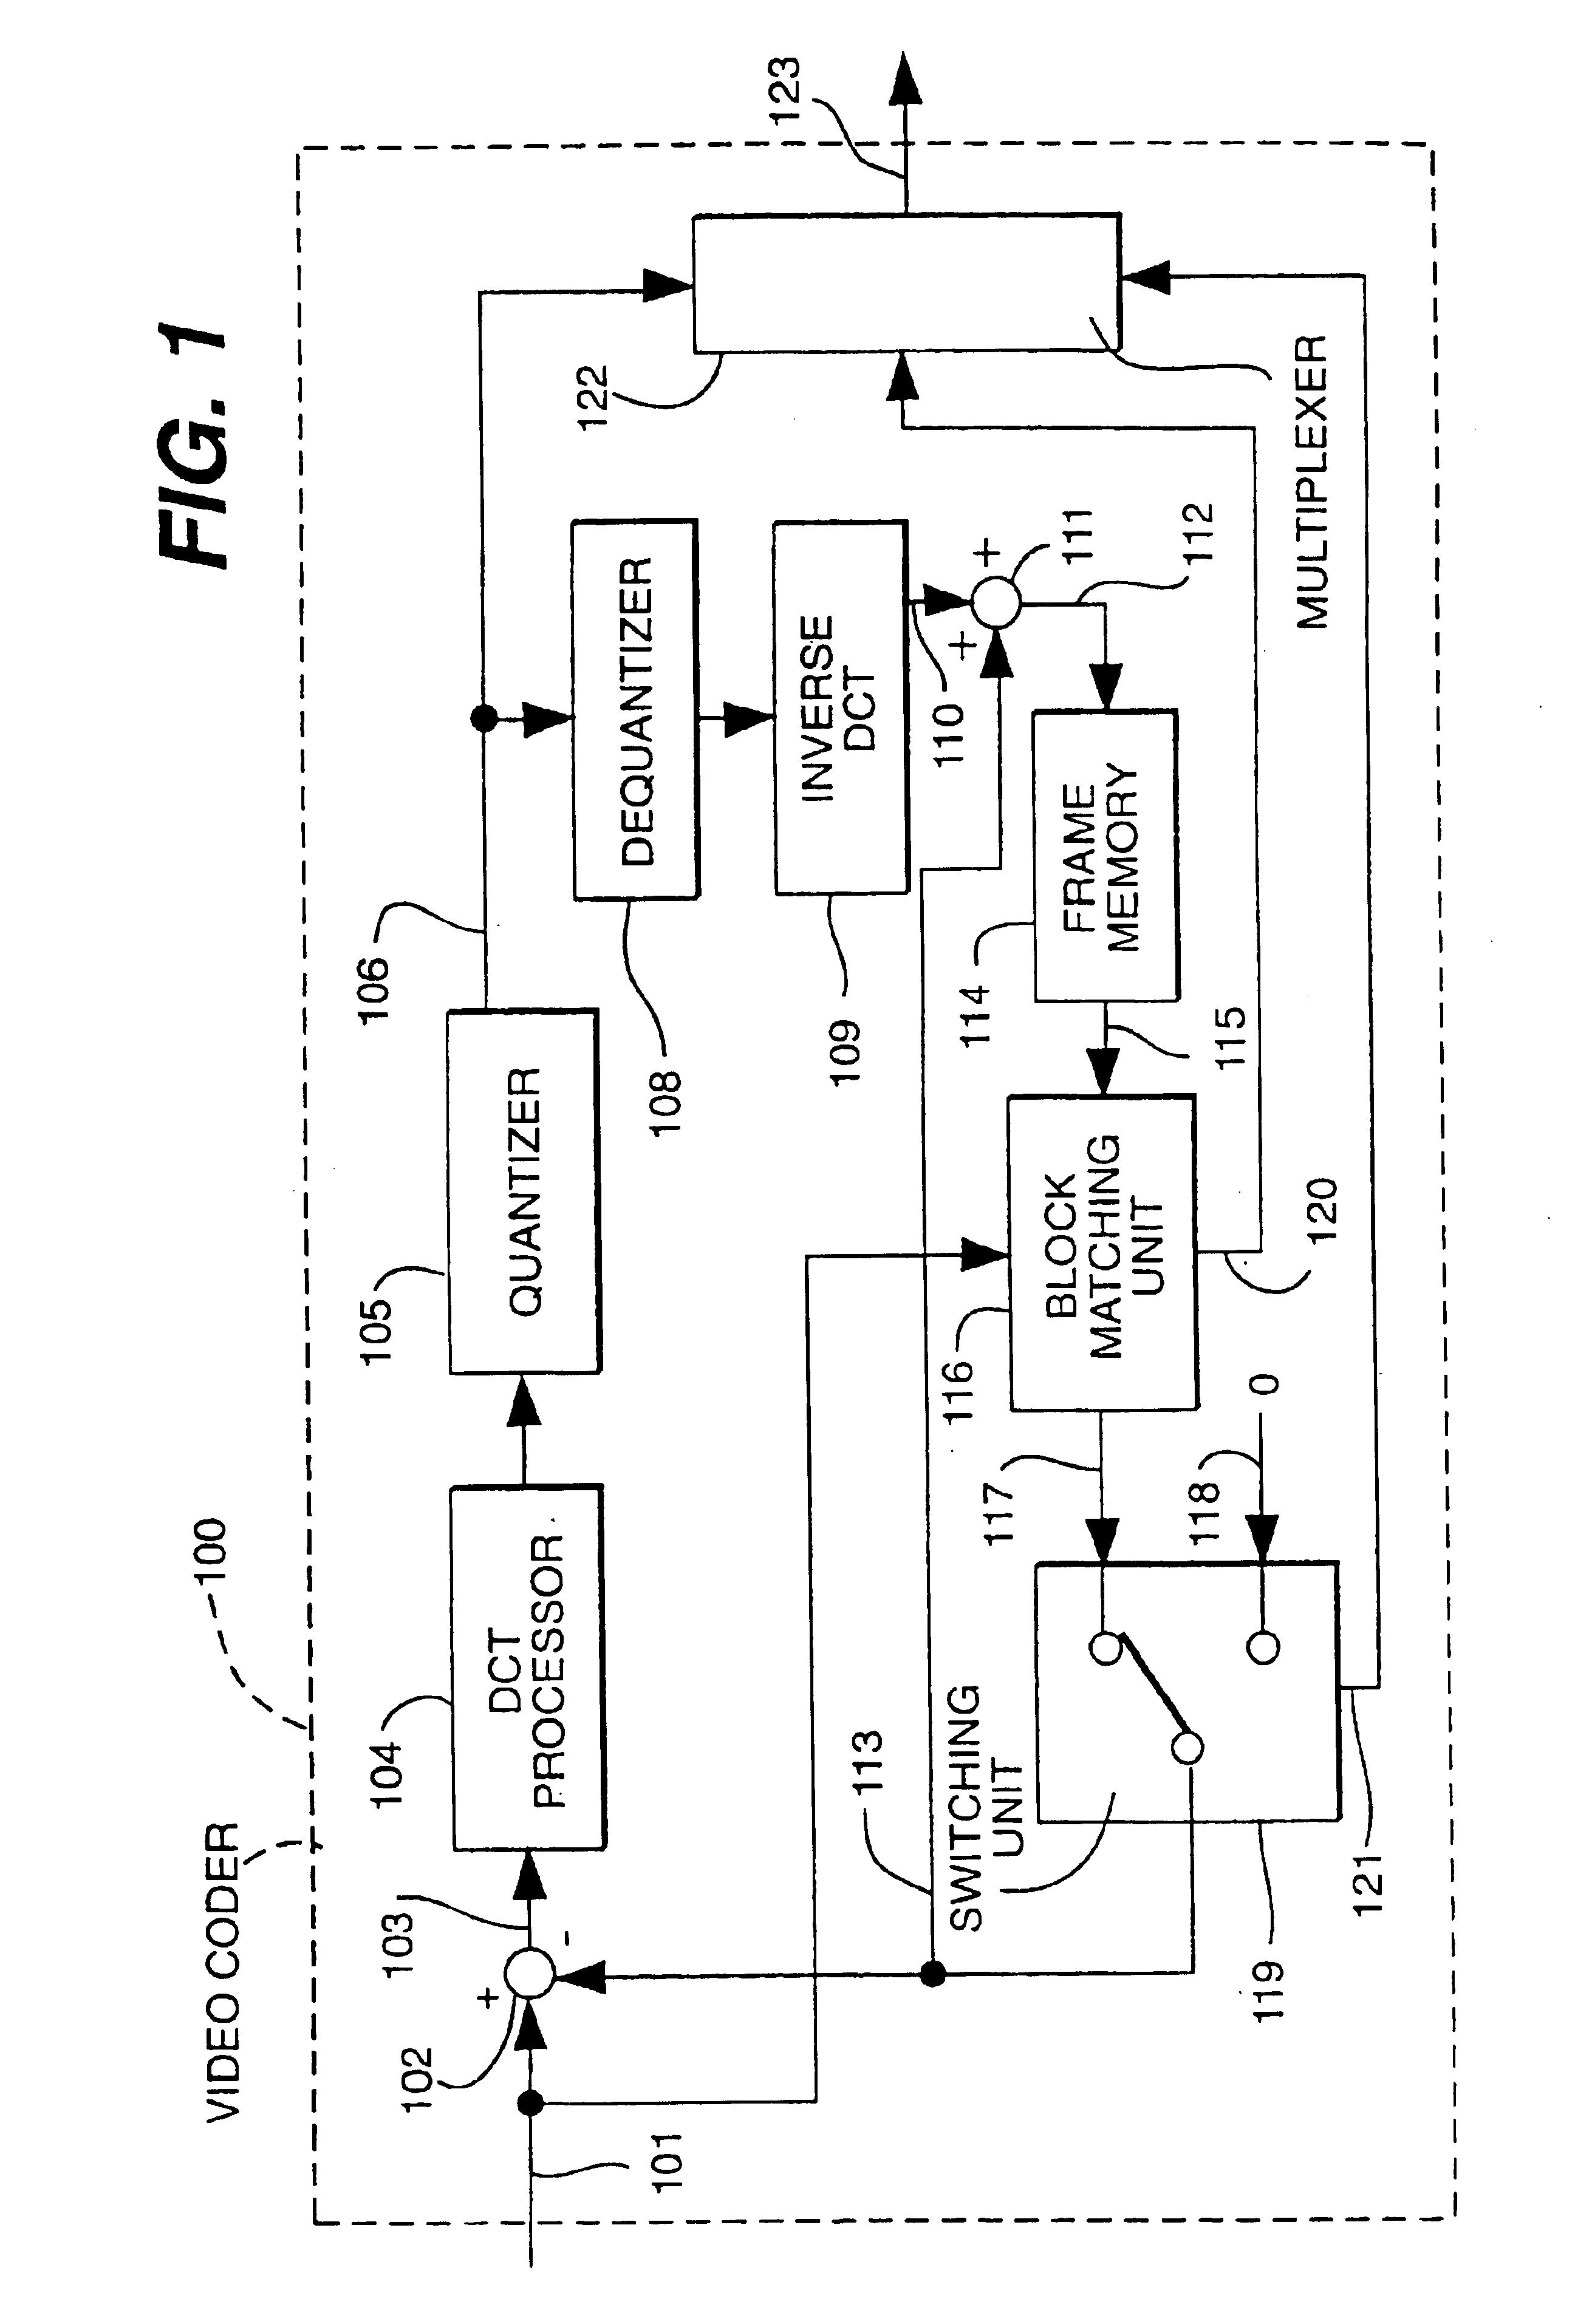 Method of coding and decoding image